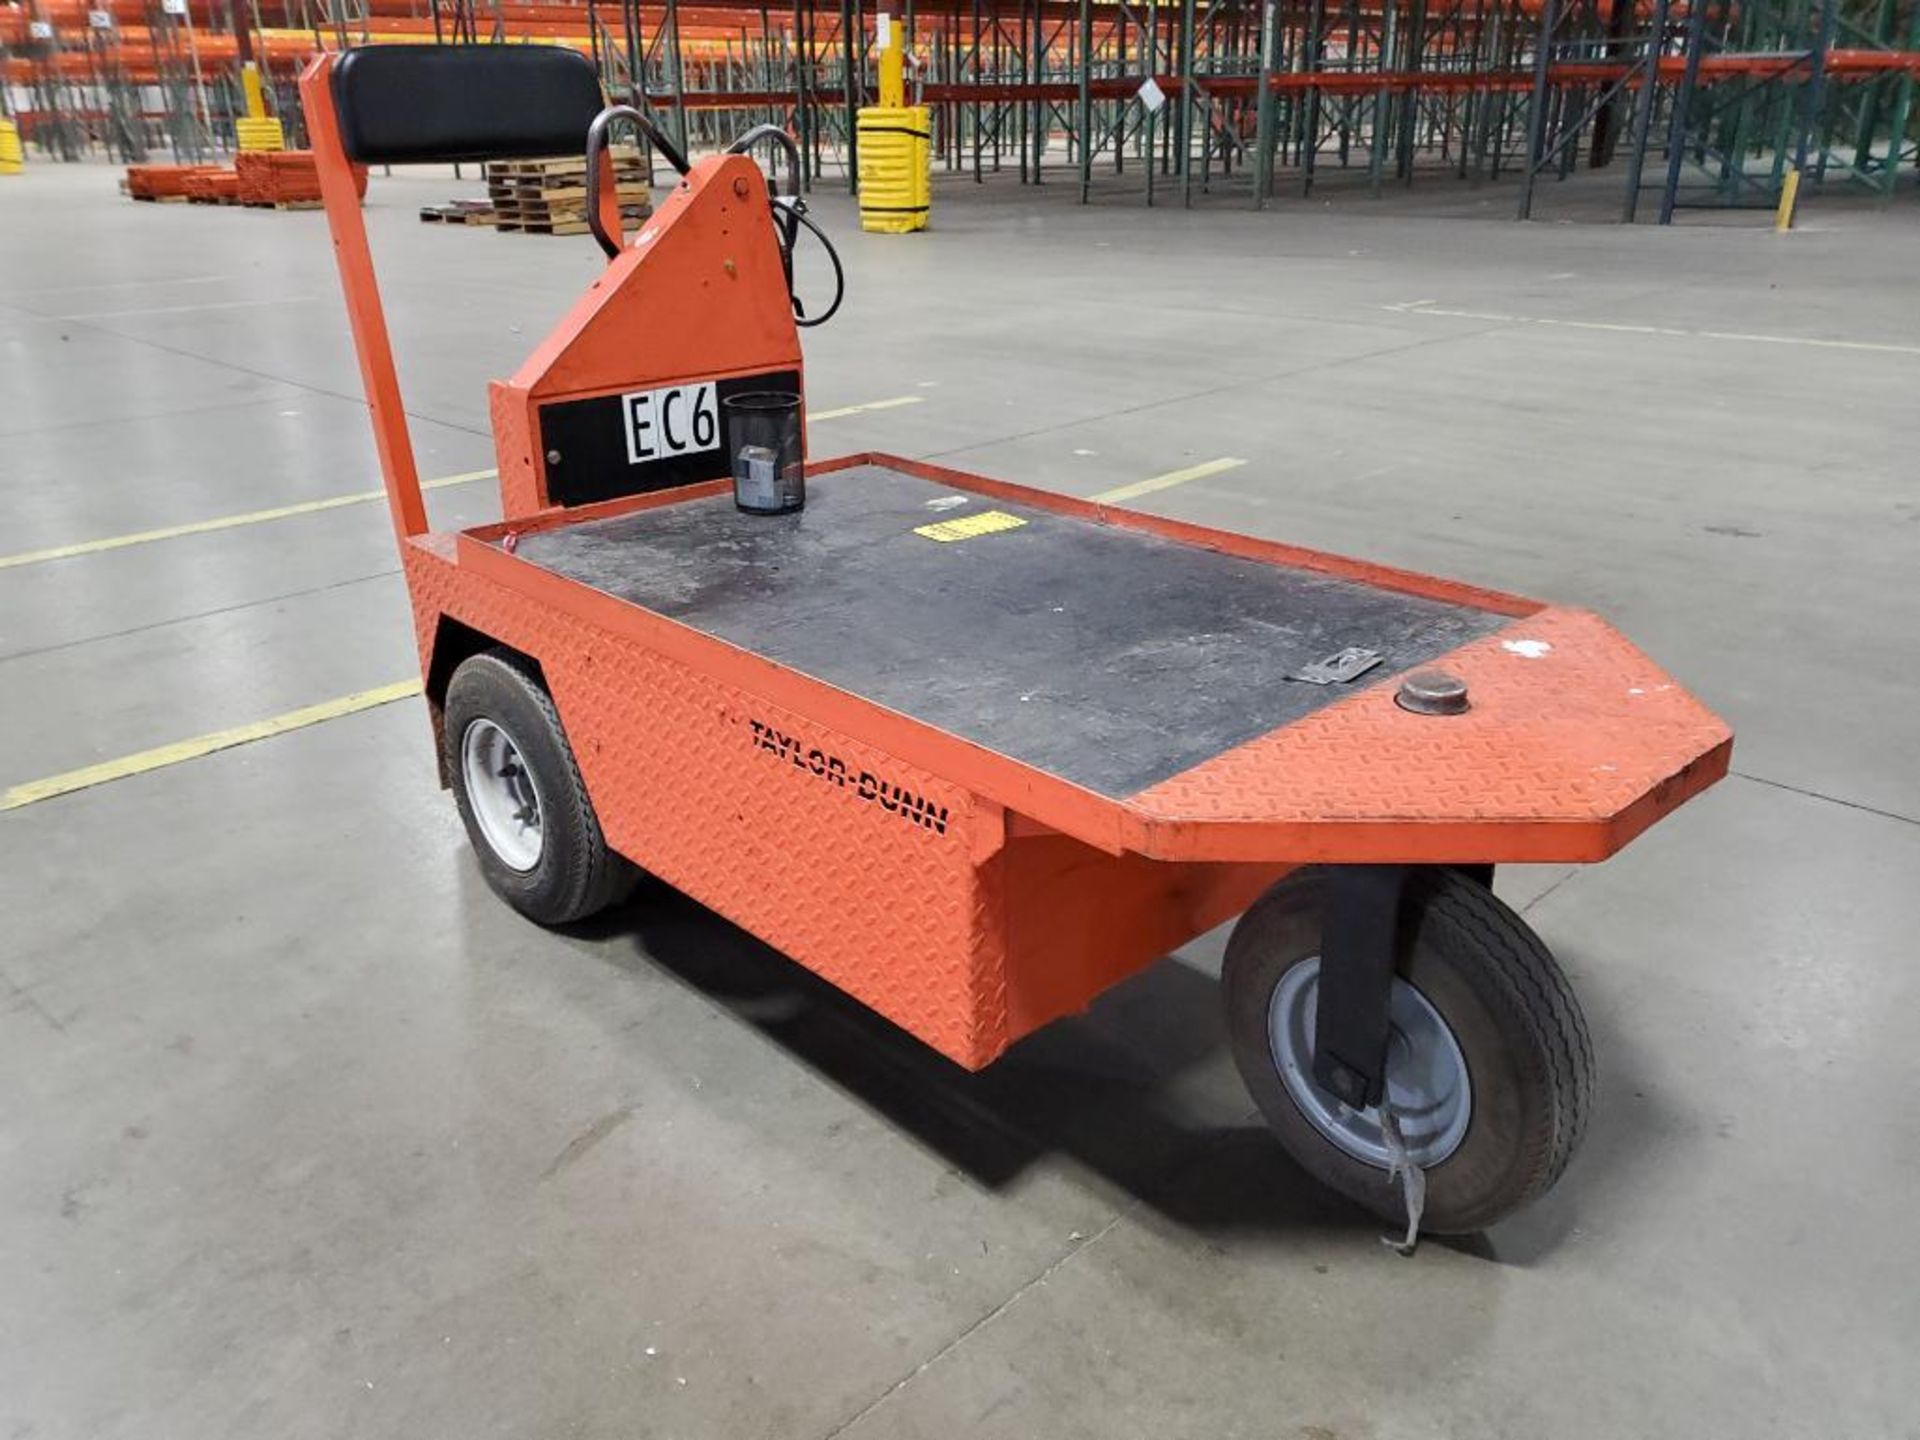 Taylor-Dunn 24V Stand-Up Personnel Cart, Model Sc1-59, S/N 150724, 1,000 LB. Capacity, Wood Deck - Image 4 of 7